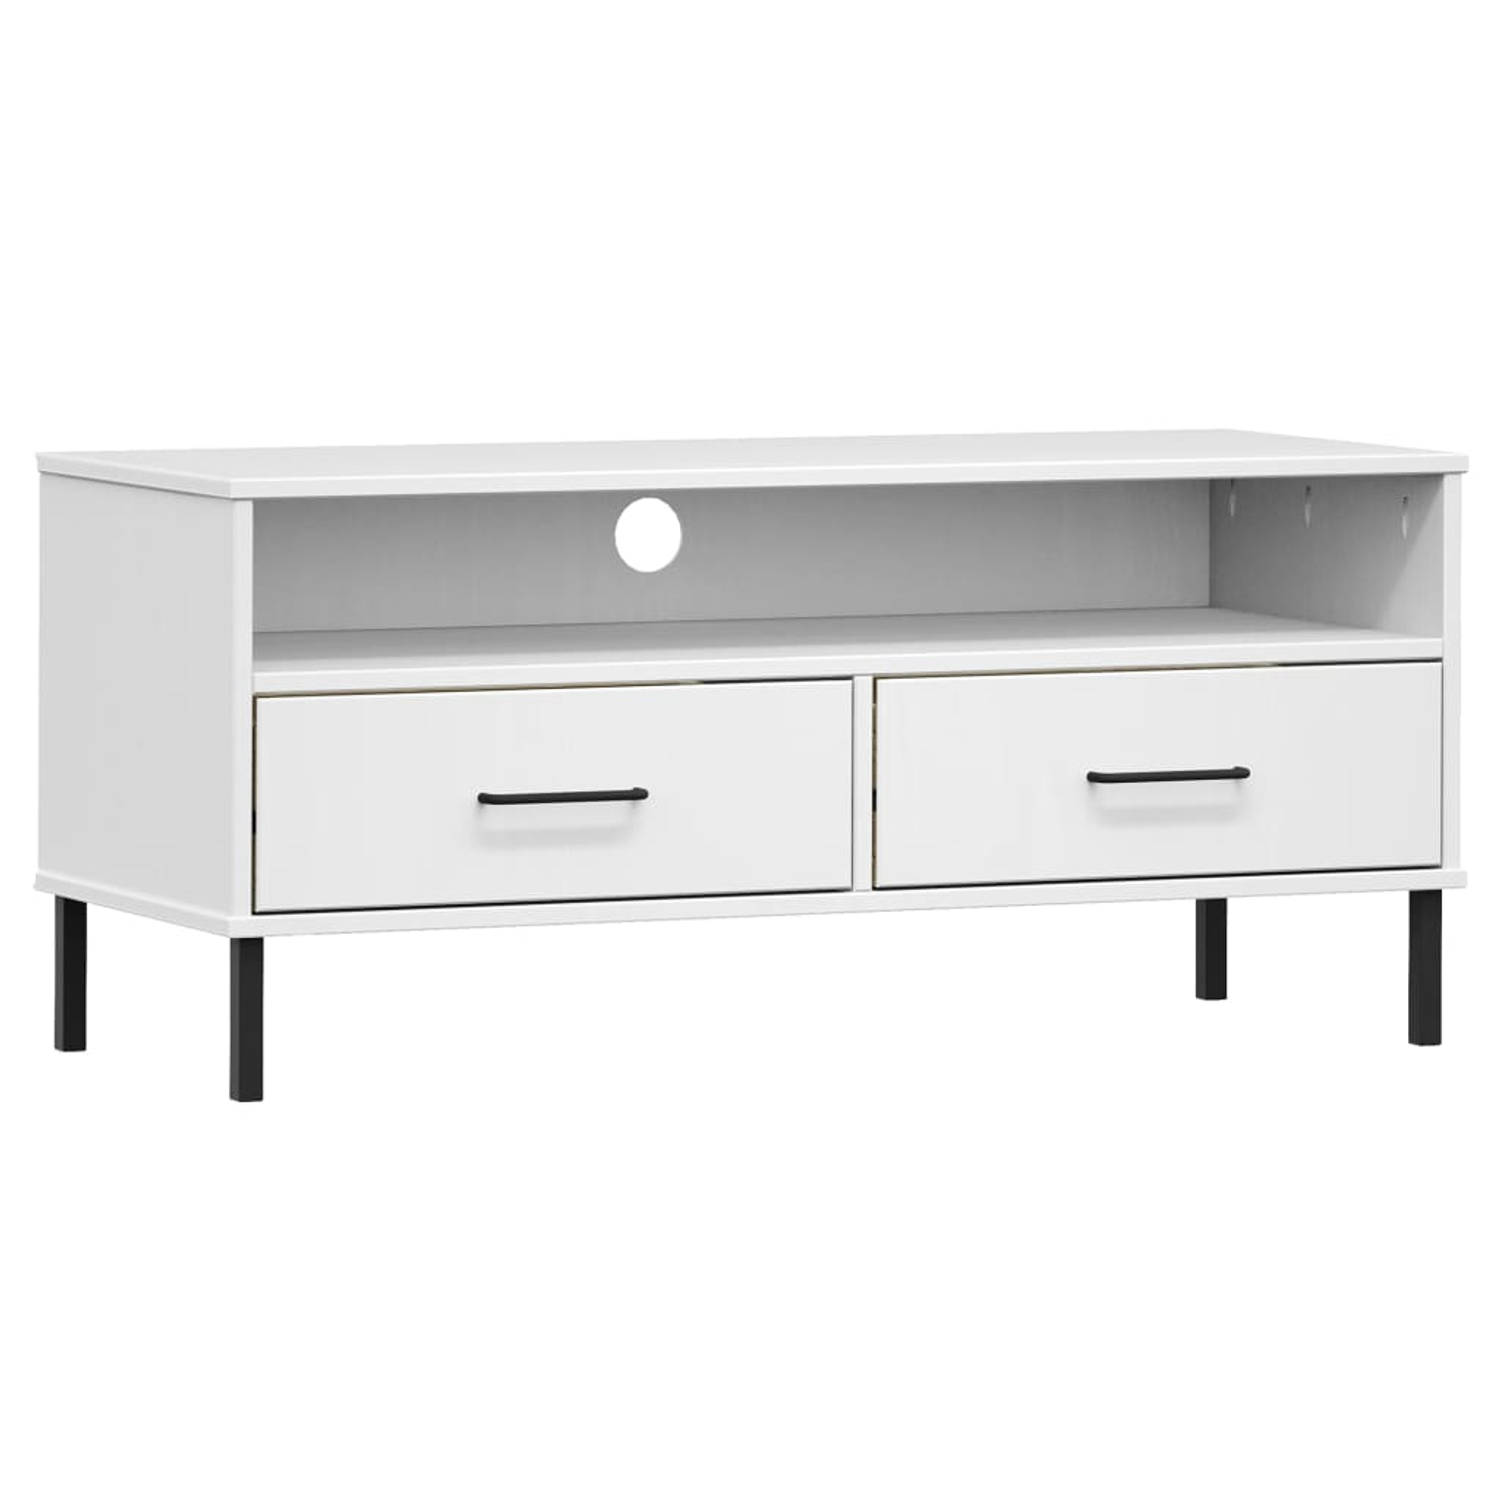 The Living Store OSLO TV-Kast - 106 x 40 x 46.5 cm - Massief grenenhout